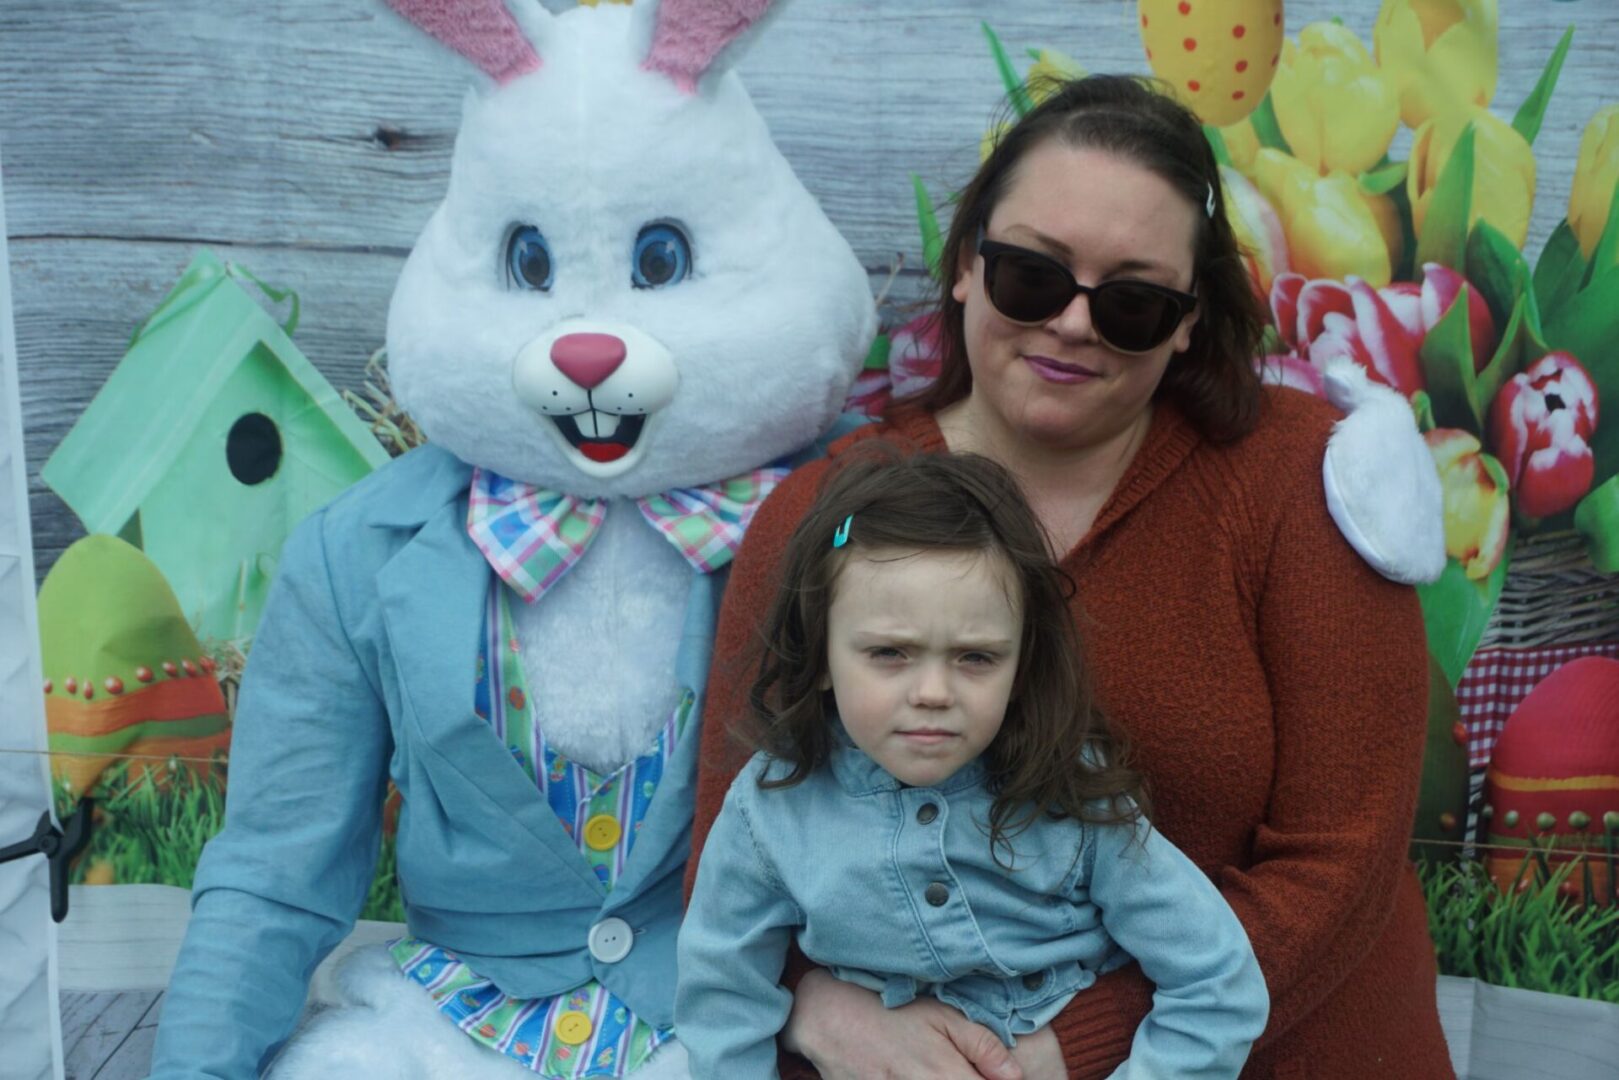 The bunny mascot with its arm around a mother wearing sunglasses and holding her daughter